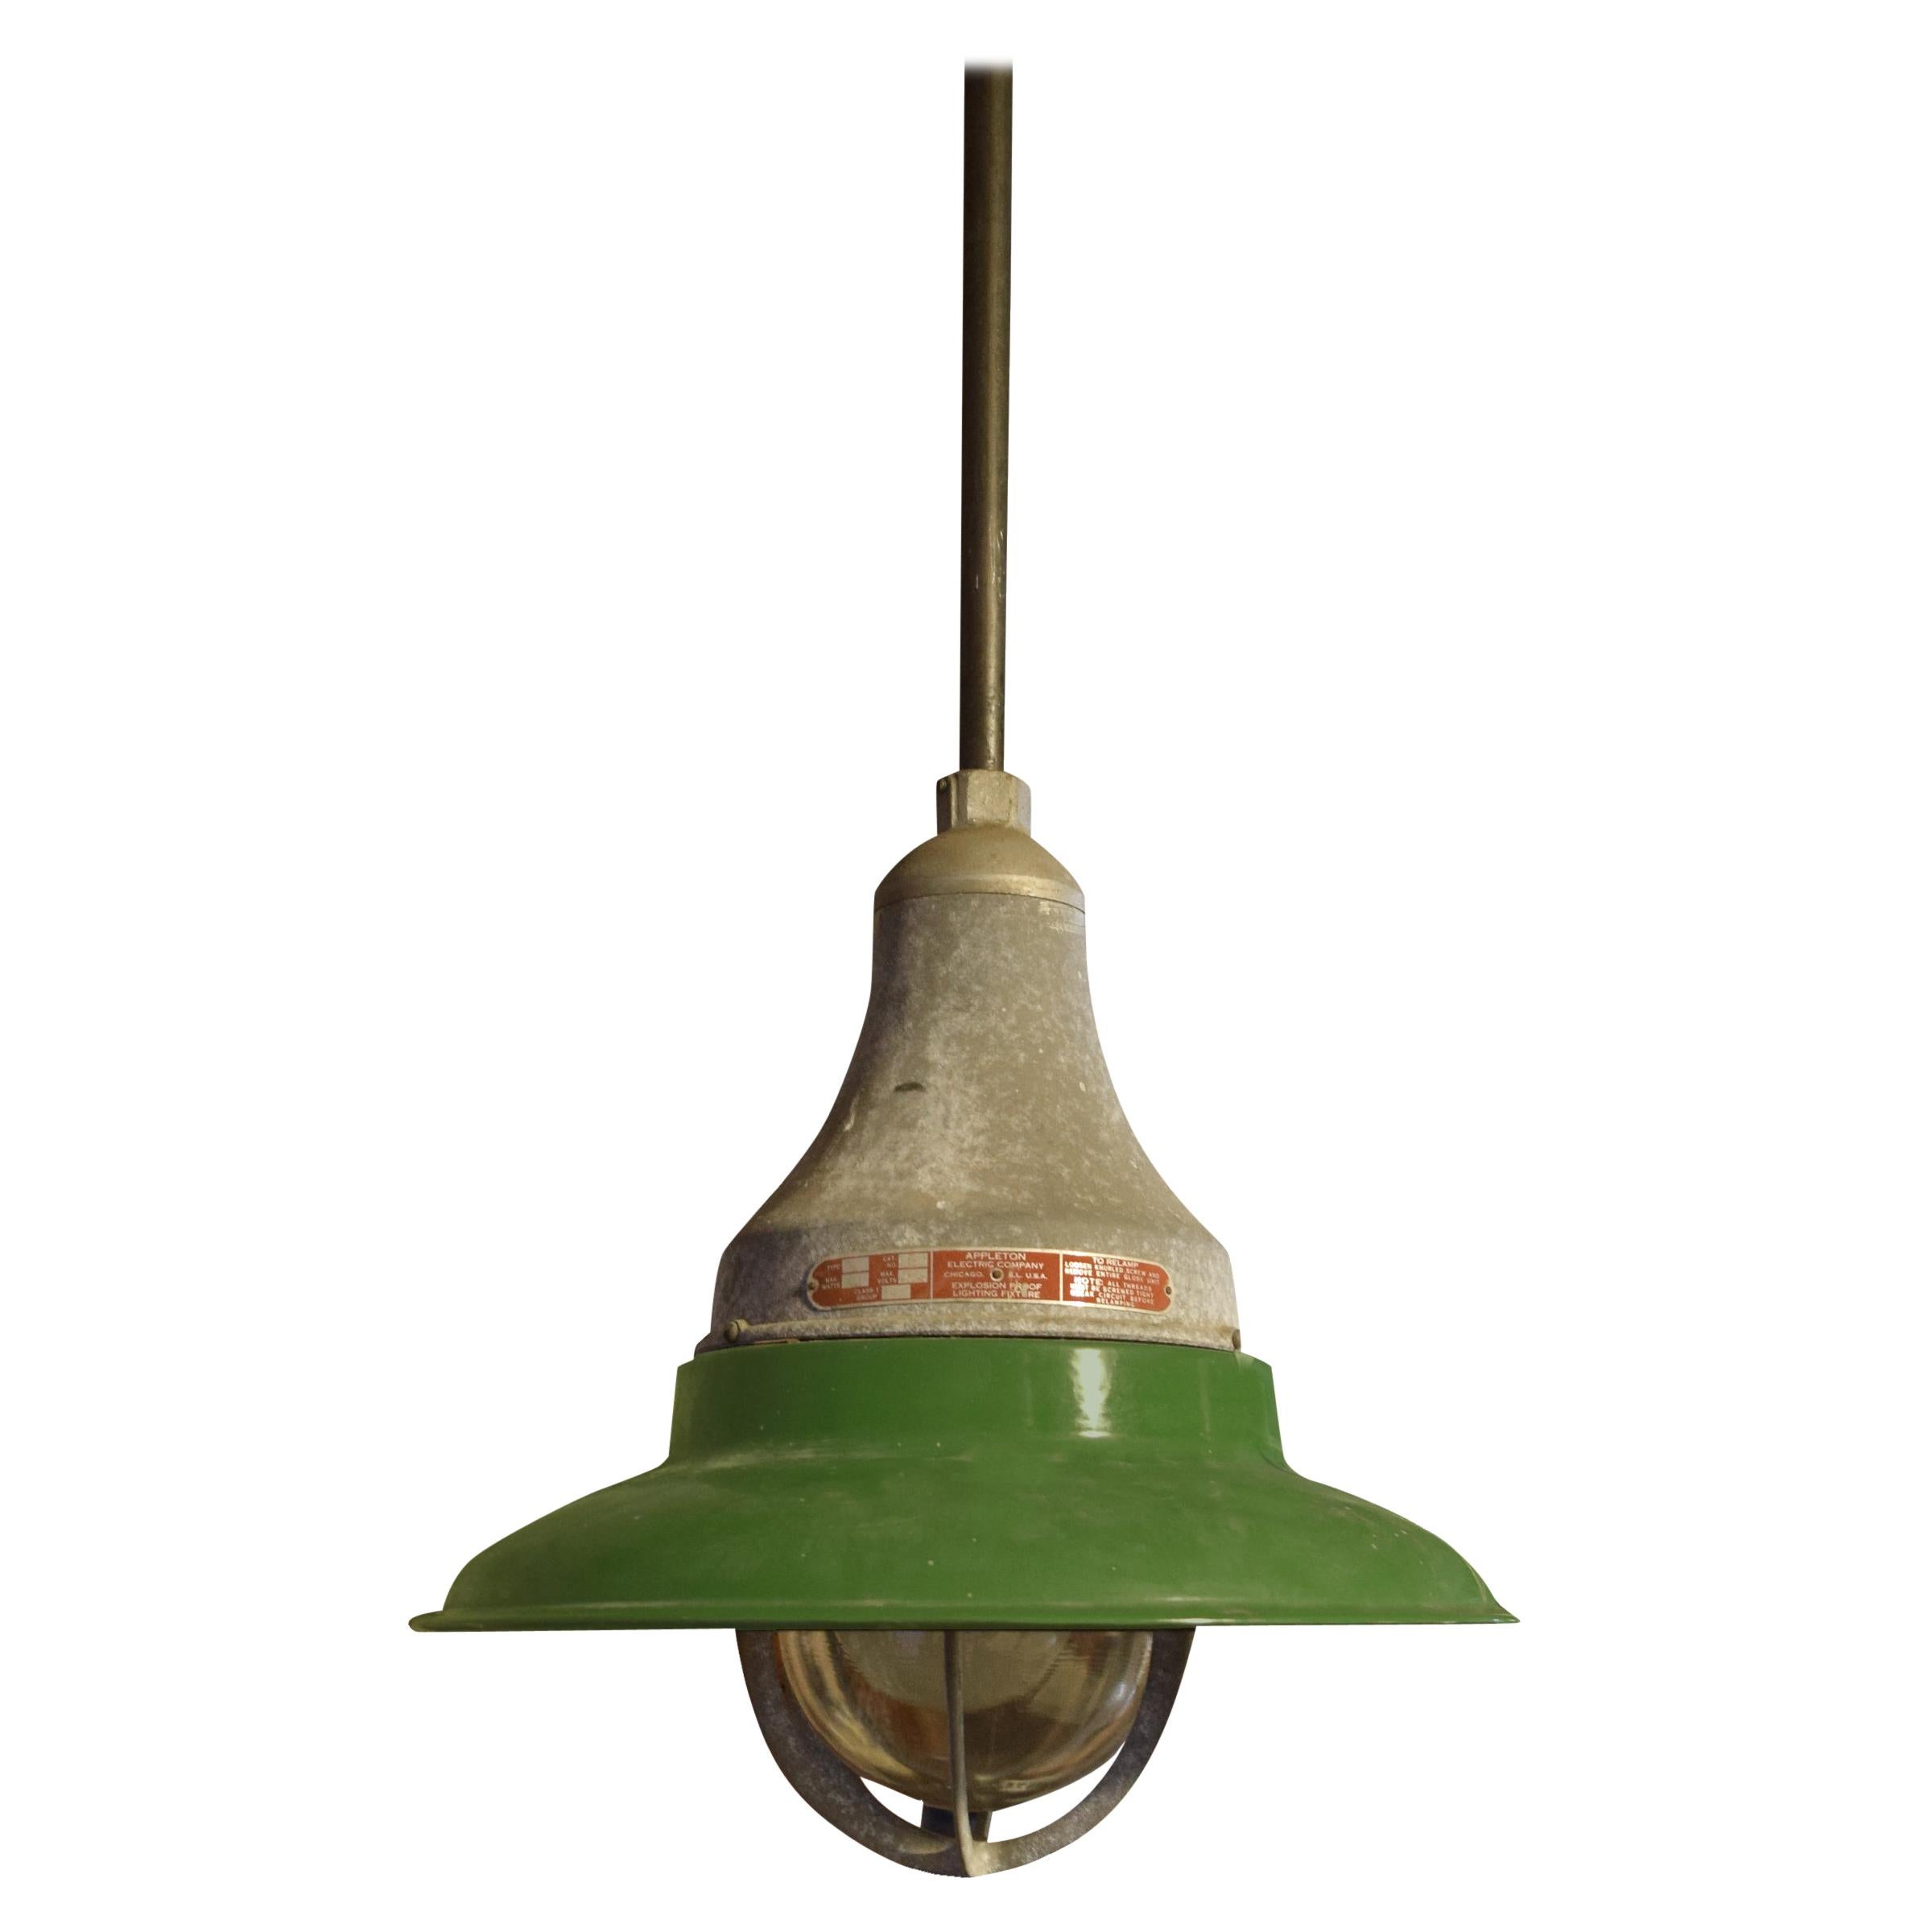 Mid-20th Century American Industrial Explosion Proof Light Fixture